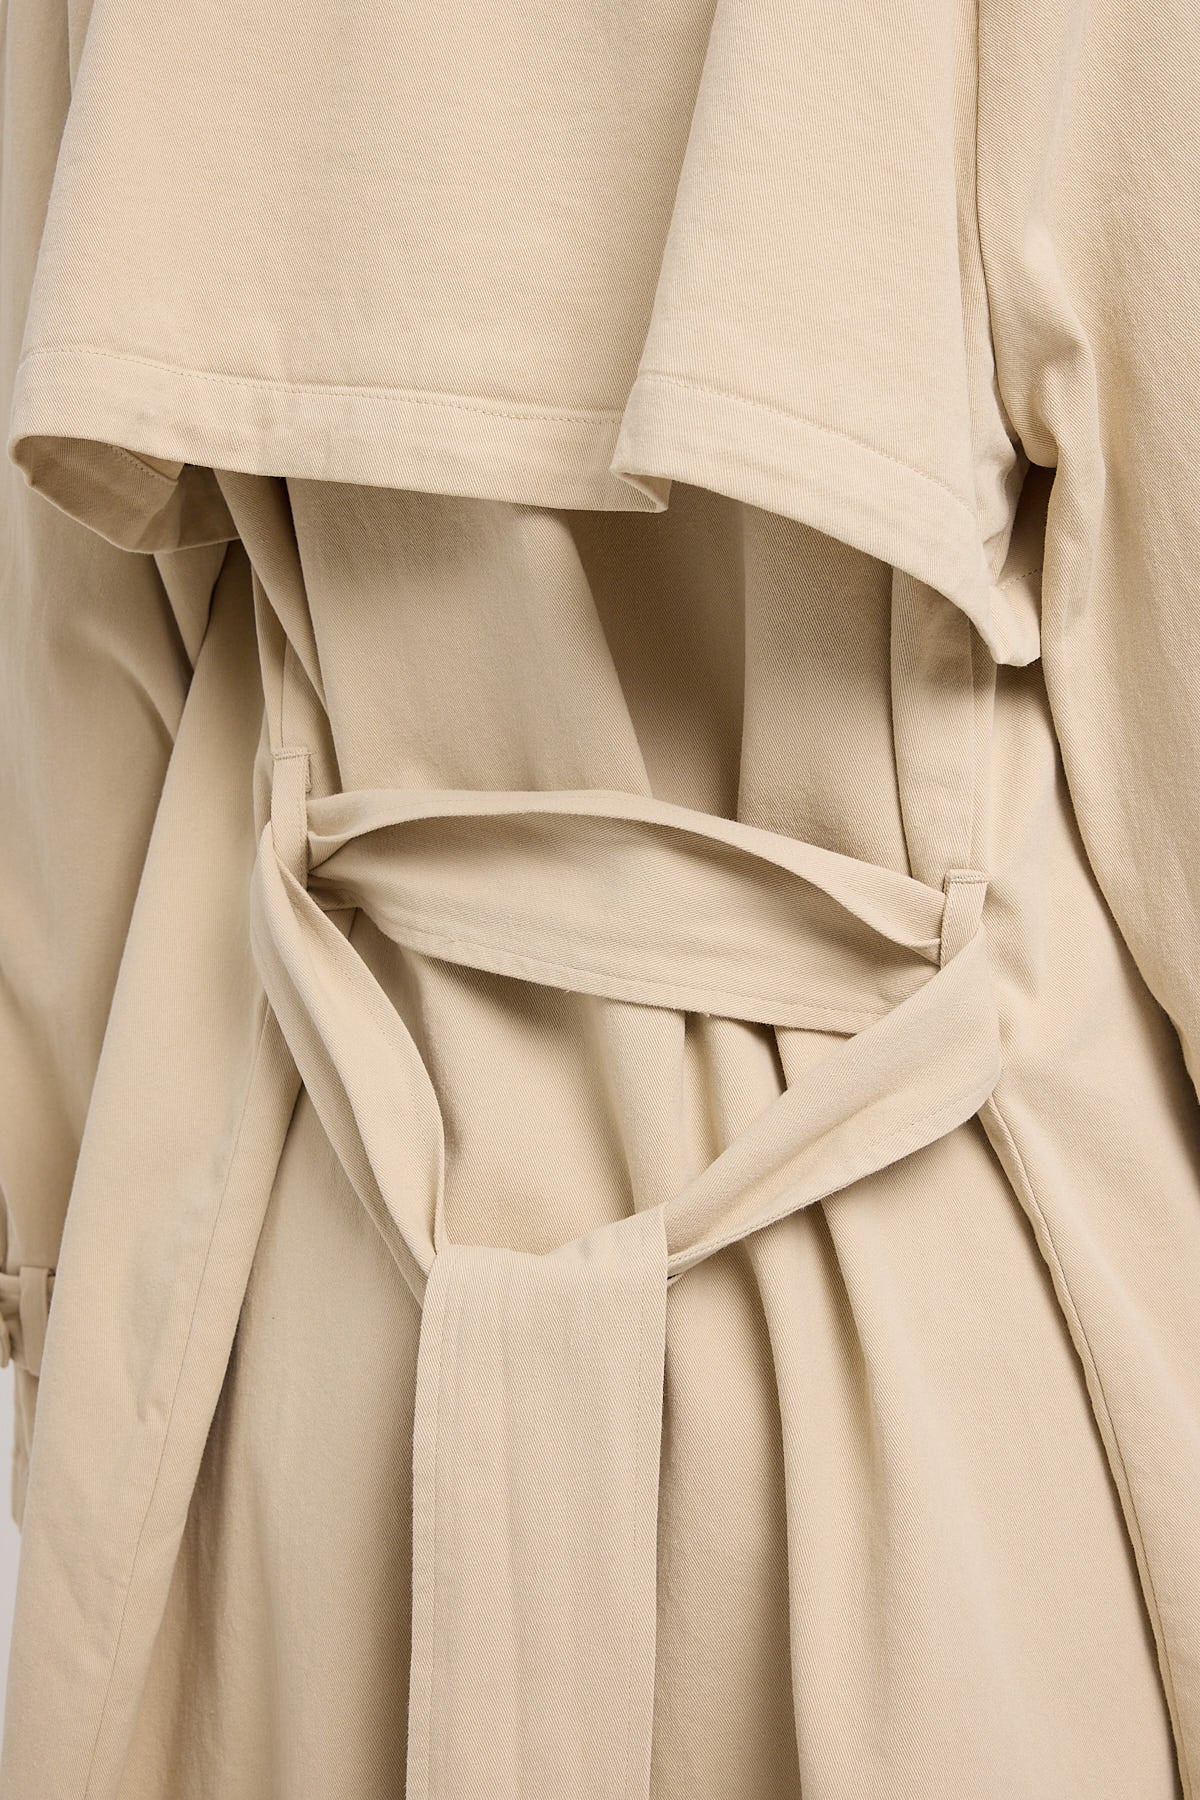 All About Eve Eve Trench Coat Tan